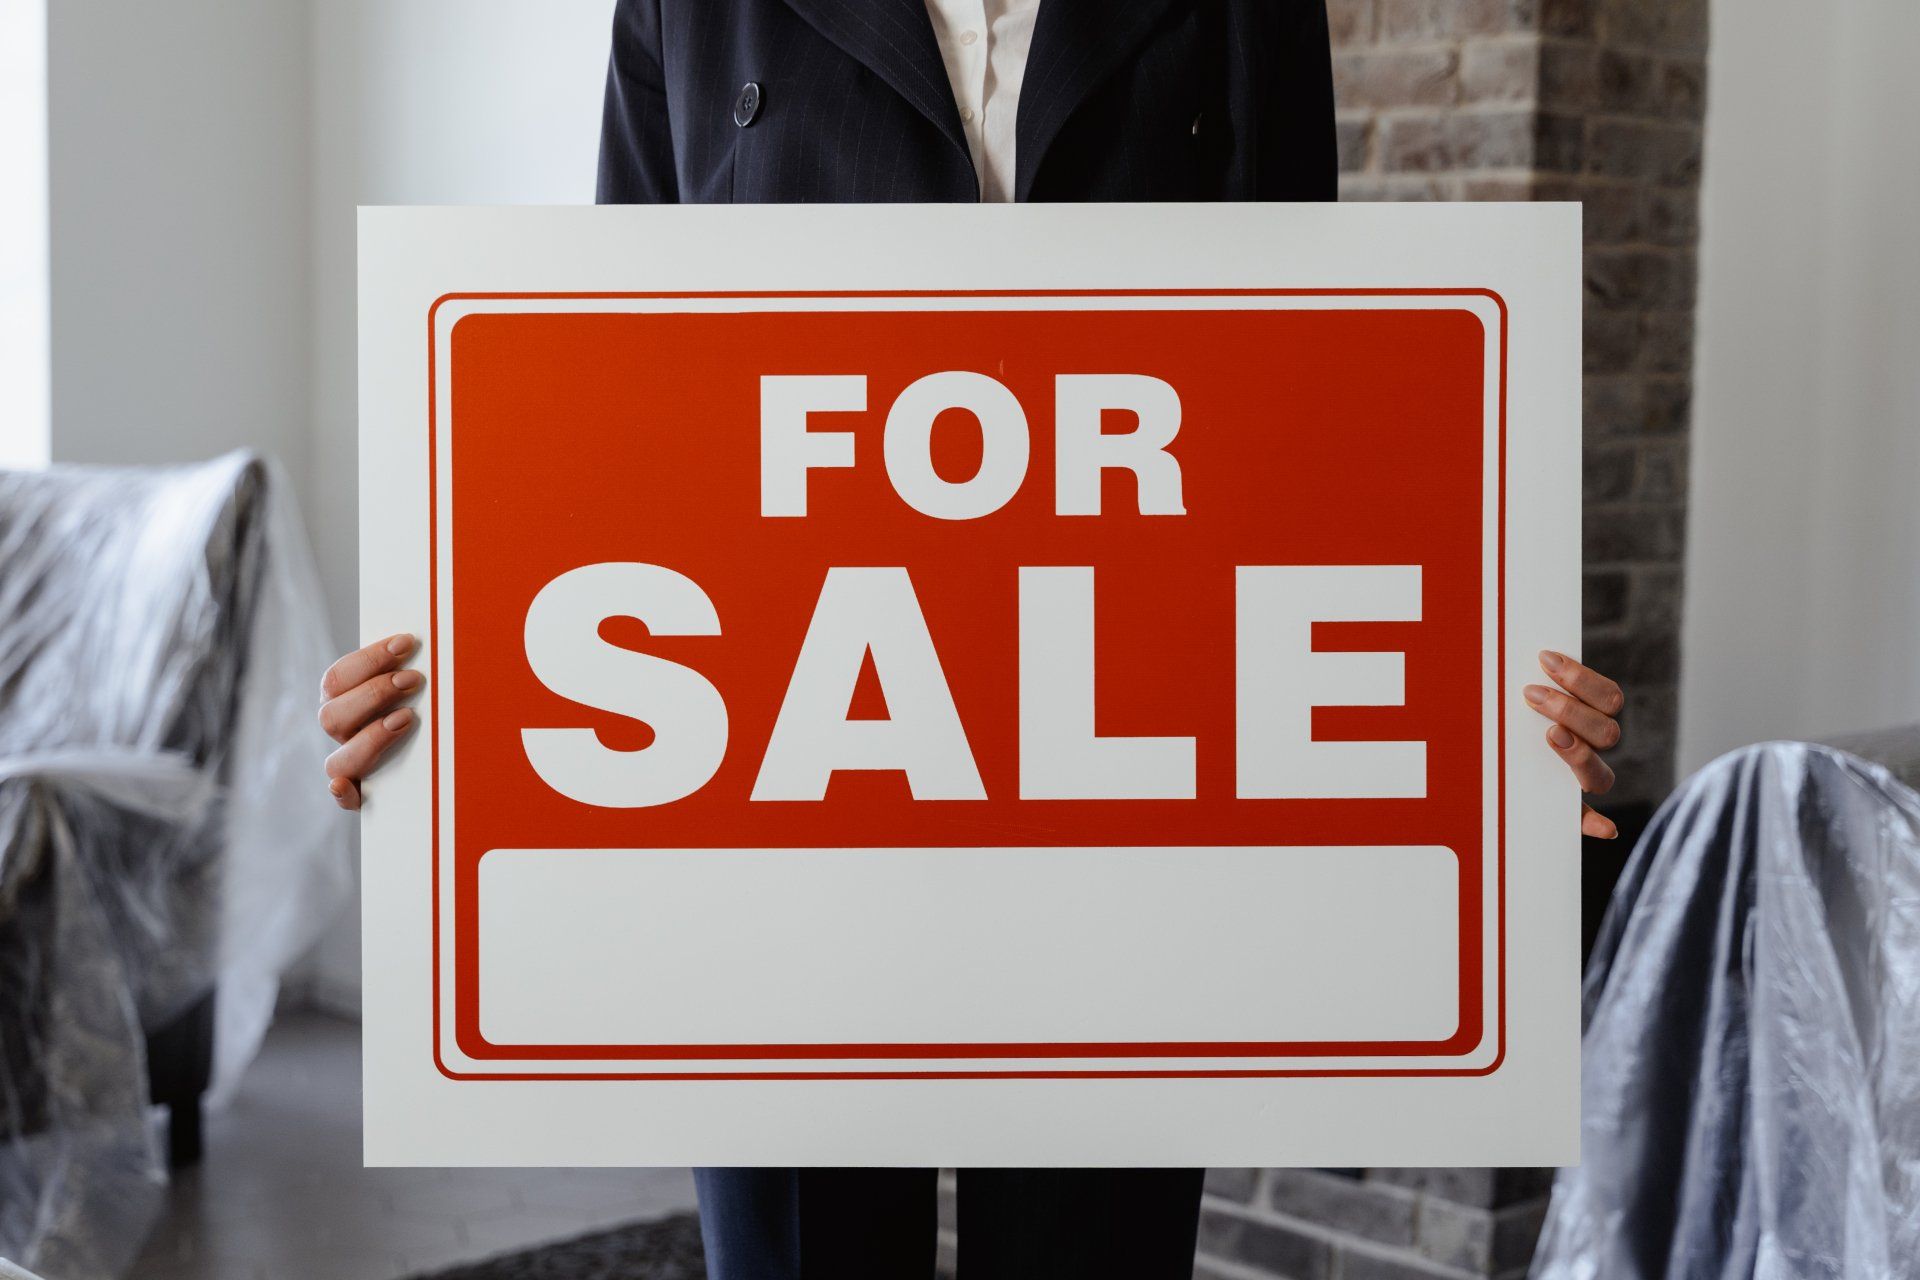 A woman is holding a for sale sign in a living room.